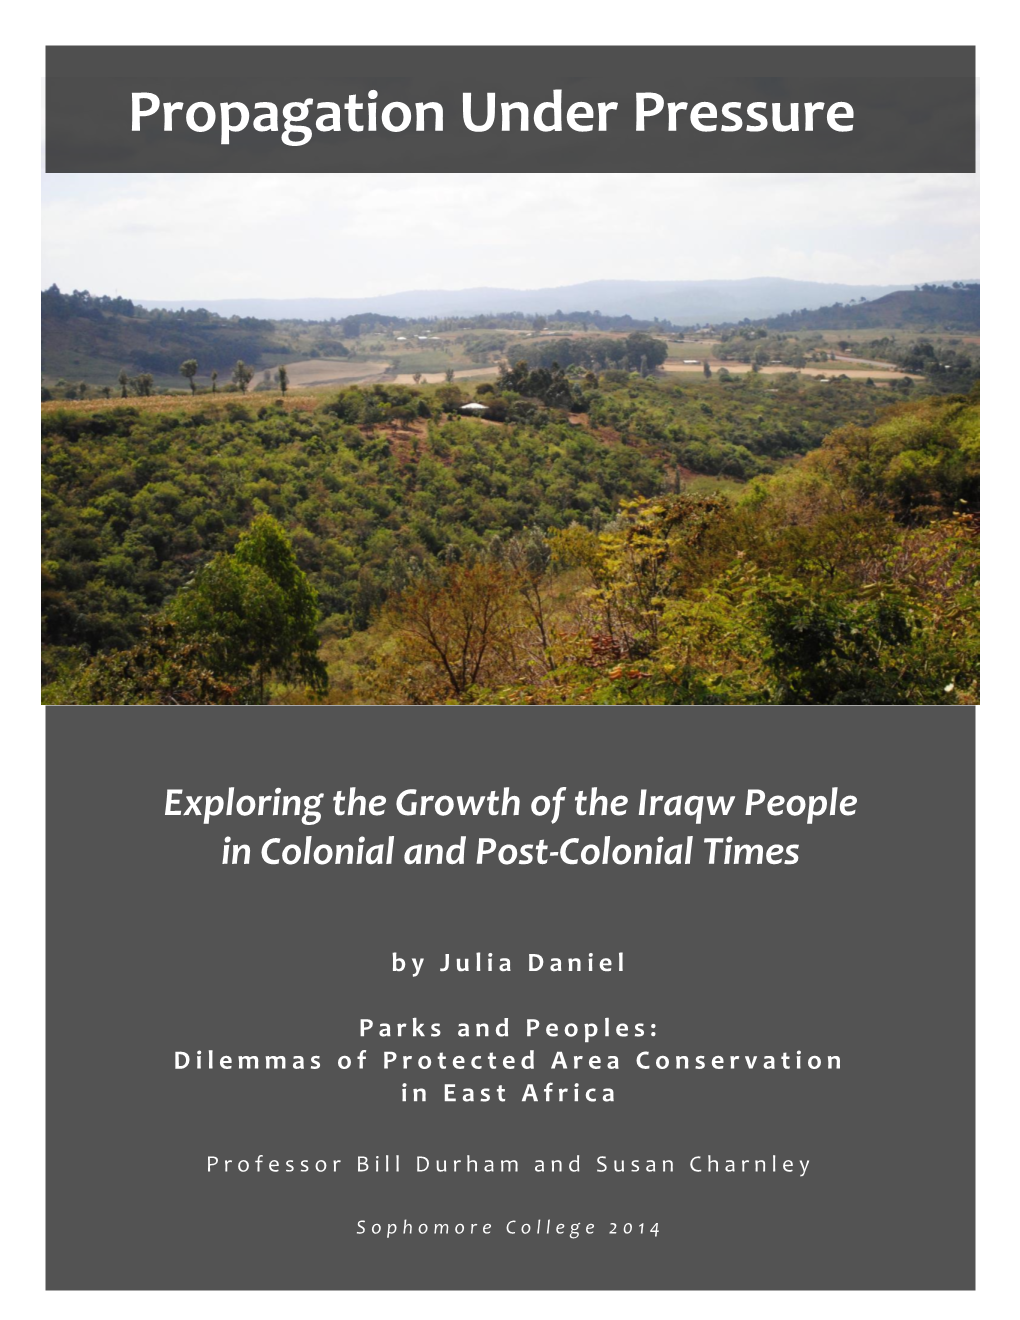 Exploring the Growth of the Iraqw People in Colonial and Post-Colonial Times